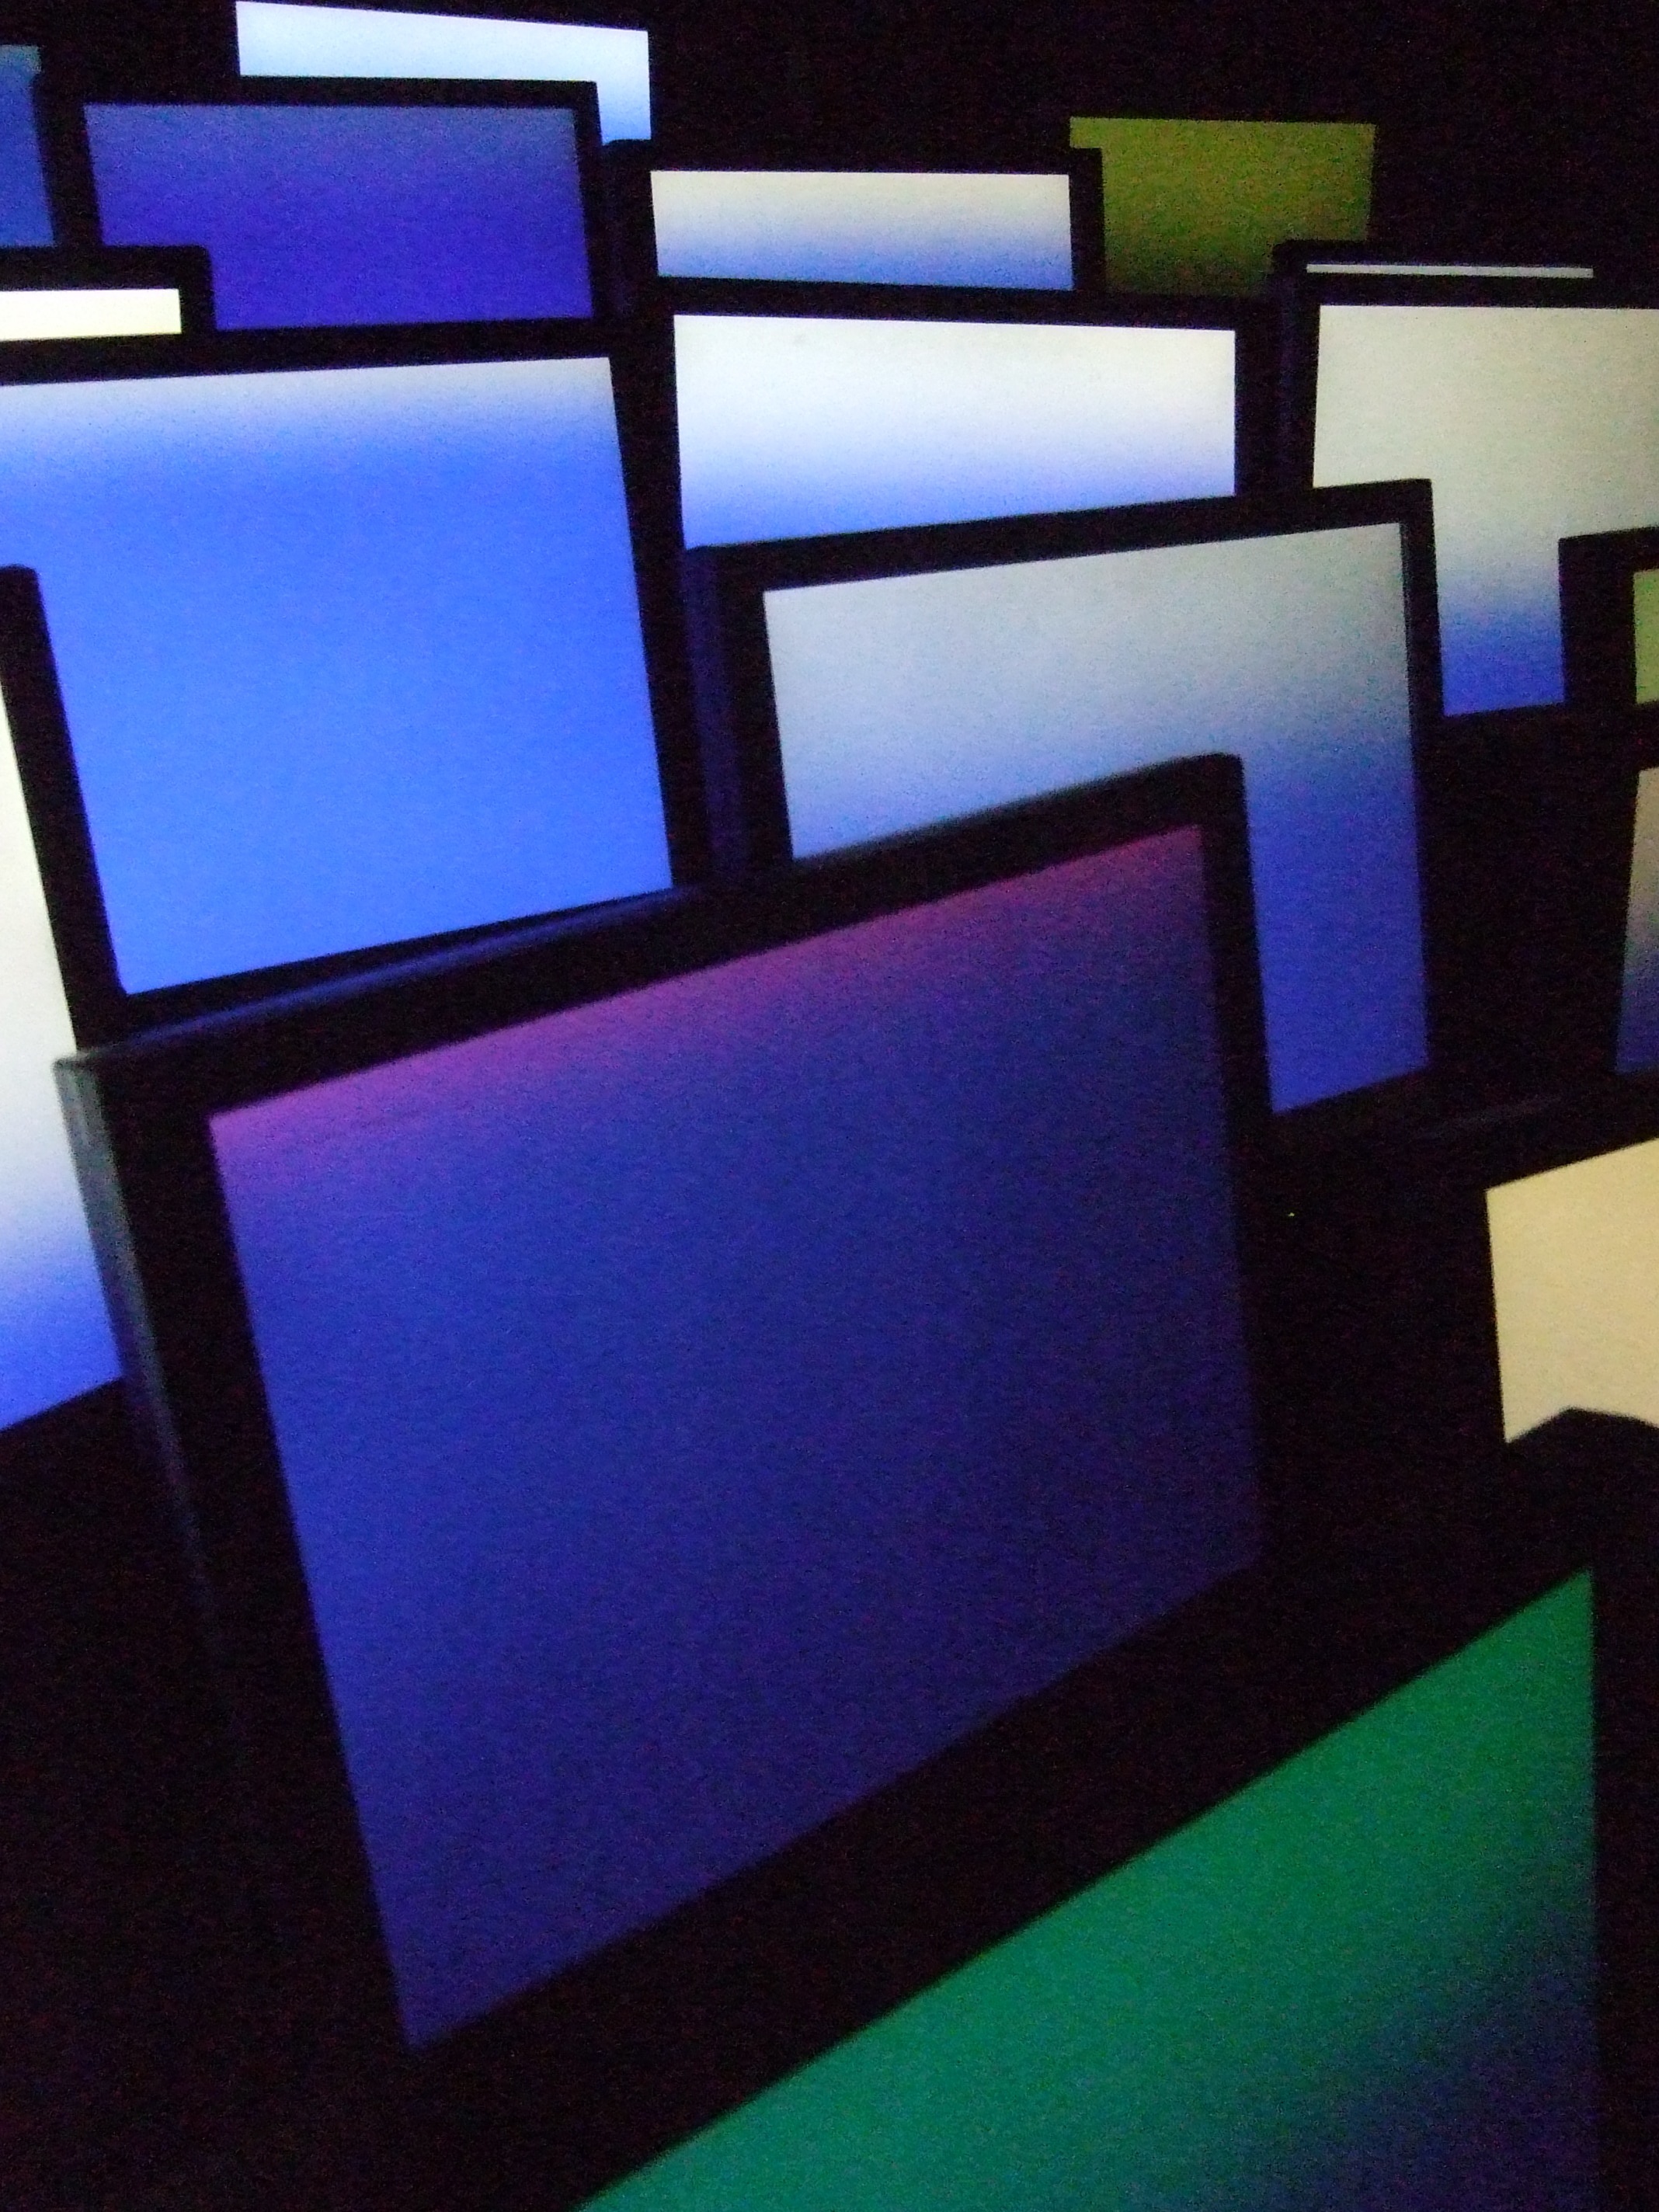 "Pixel VGA (Version 1, Banff Floor Cluster)" by G A R N E T on Flickr (CC BY-NC-ND 2.0)